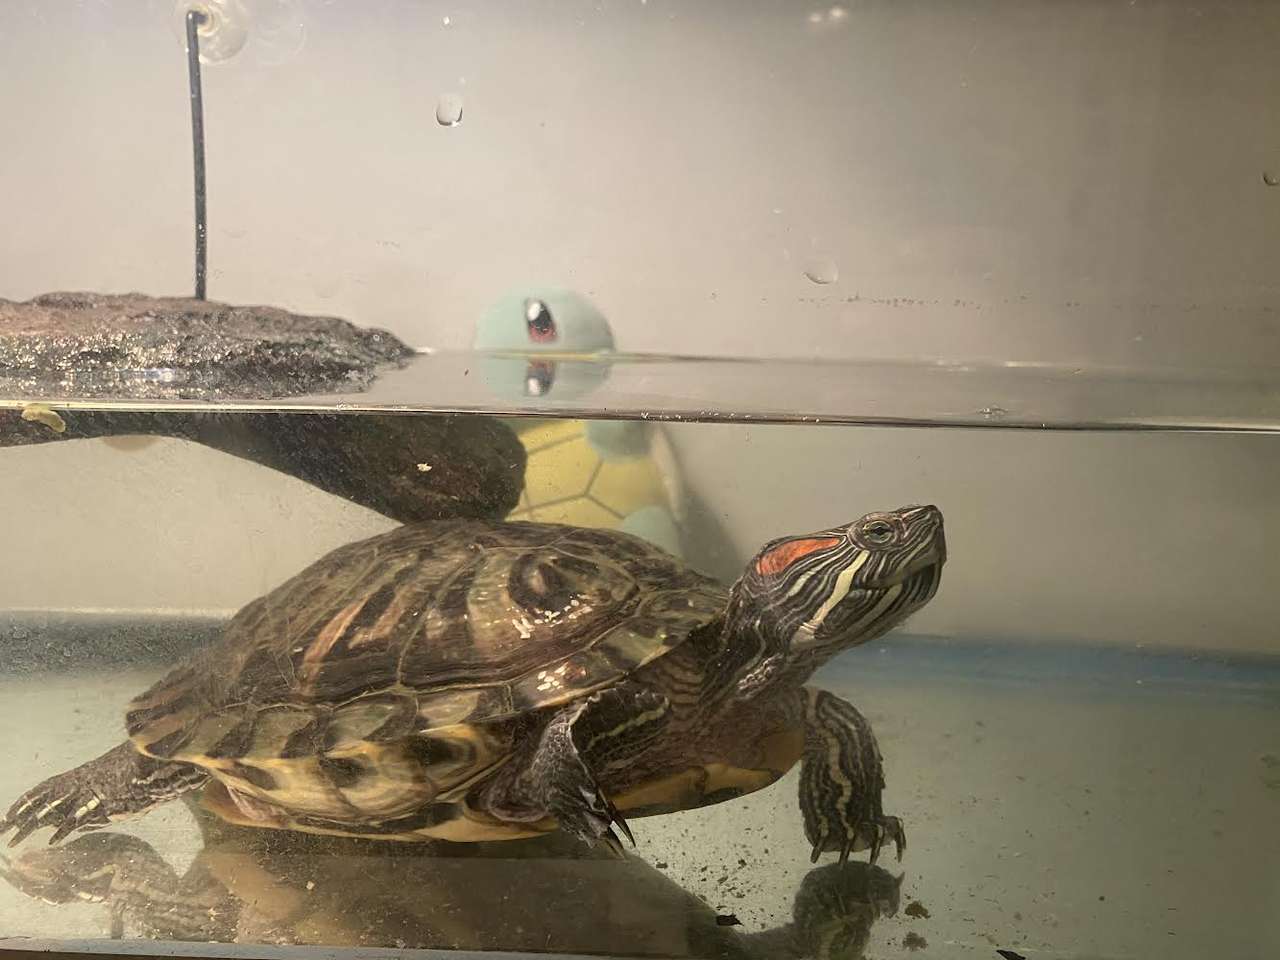 This Turtle is about to go on an big Adventure puzzle online from photo